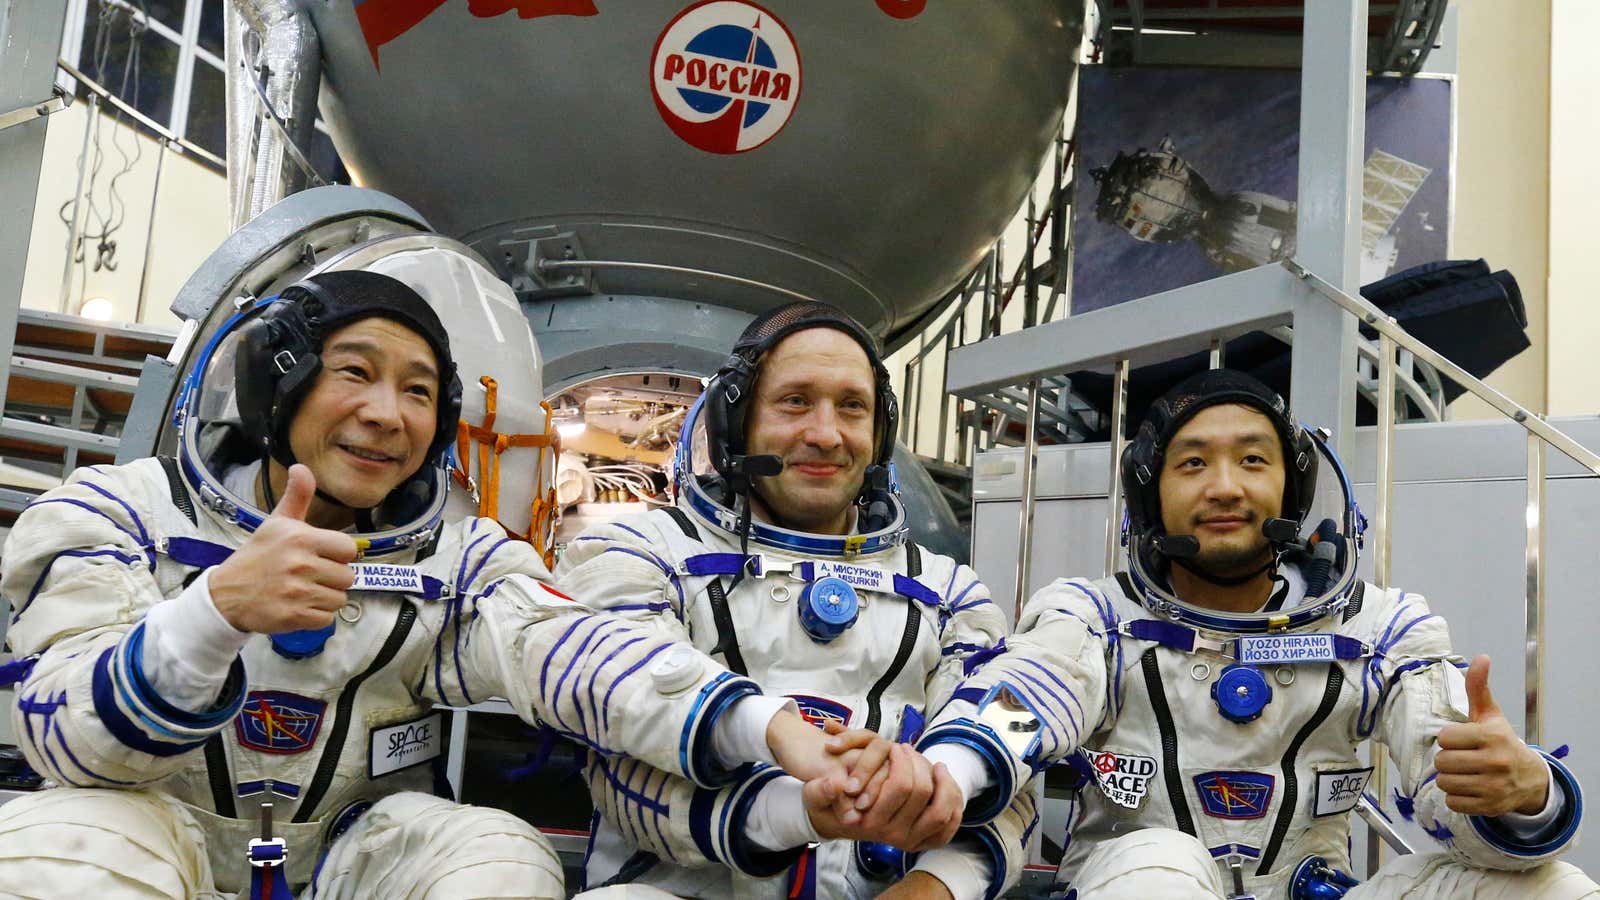 Russian cosmonaut Alexander Misurkin (C) and space flight participants - Japanese billionaire Yusaku Maezawa (L) and his assistant Yozo Hirano - attend a training ahead of the expedition to the International Space Station, in Star City outside Moscow on October 14, 2021.Â 